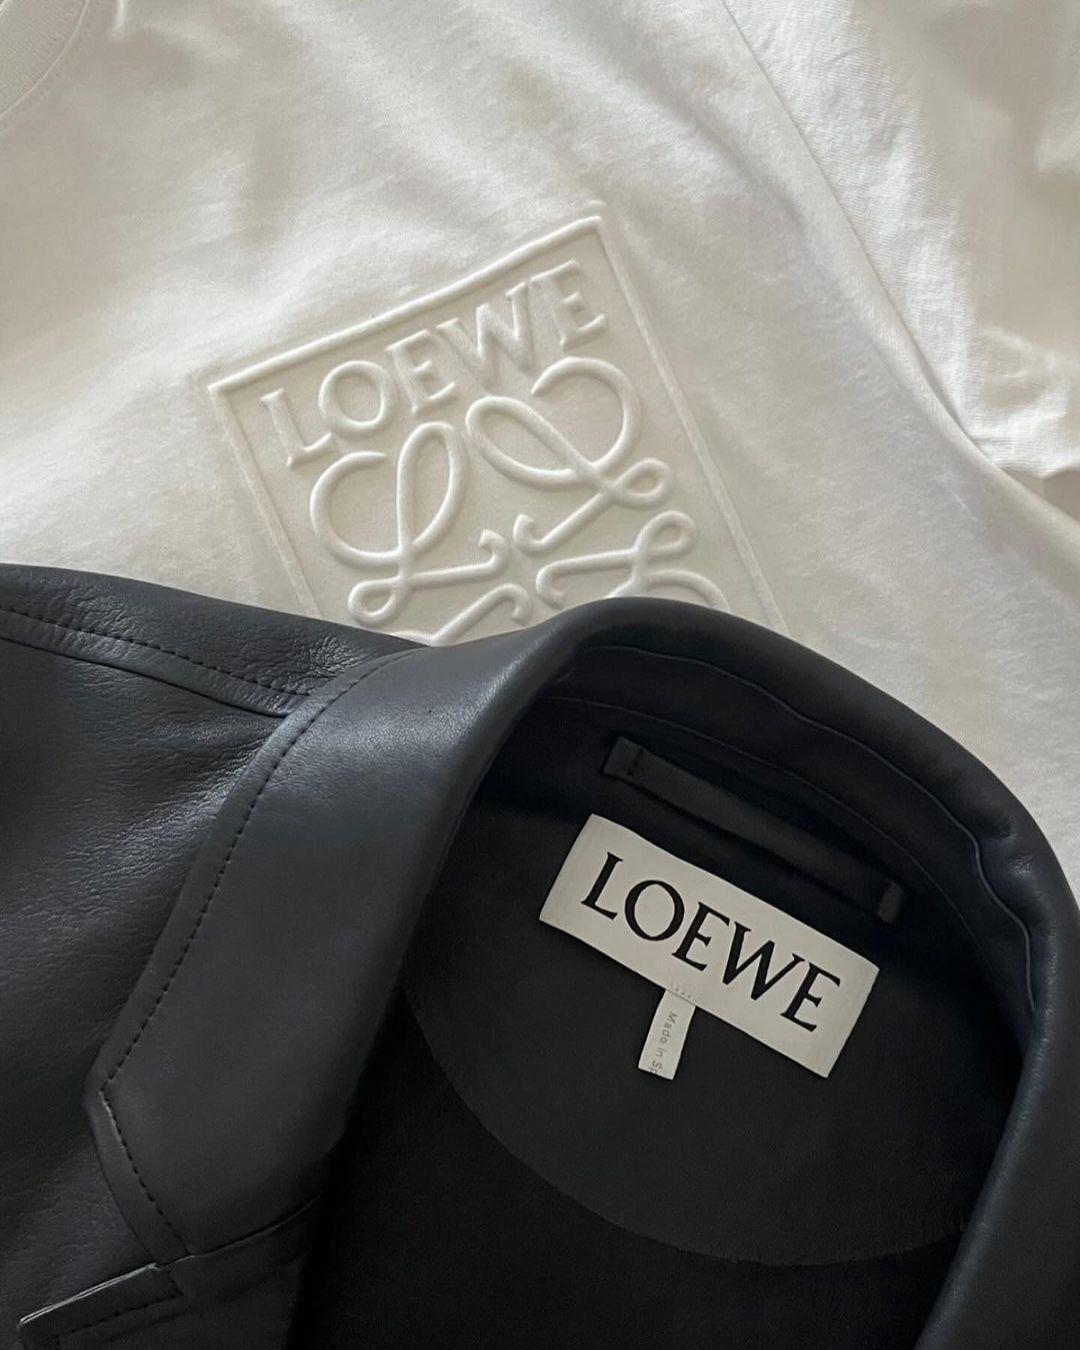 class="content__text"LOEWE 
#jagaagamajagamoral